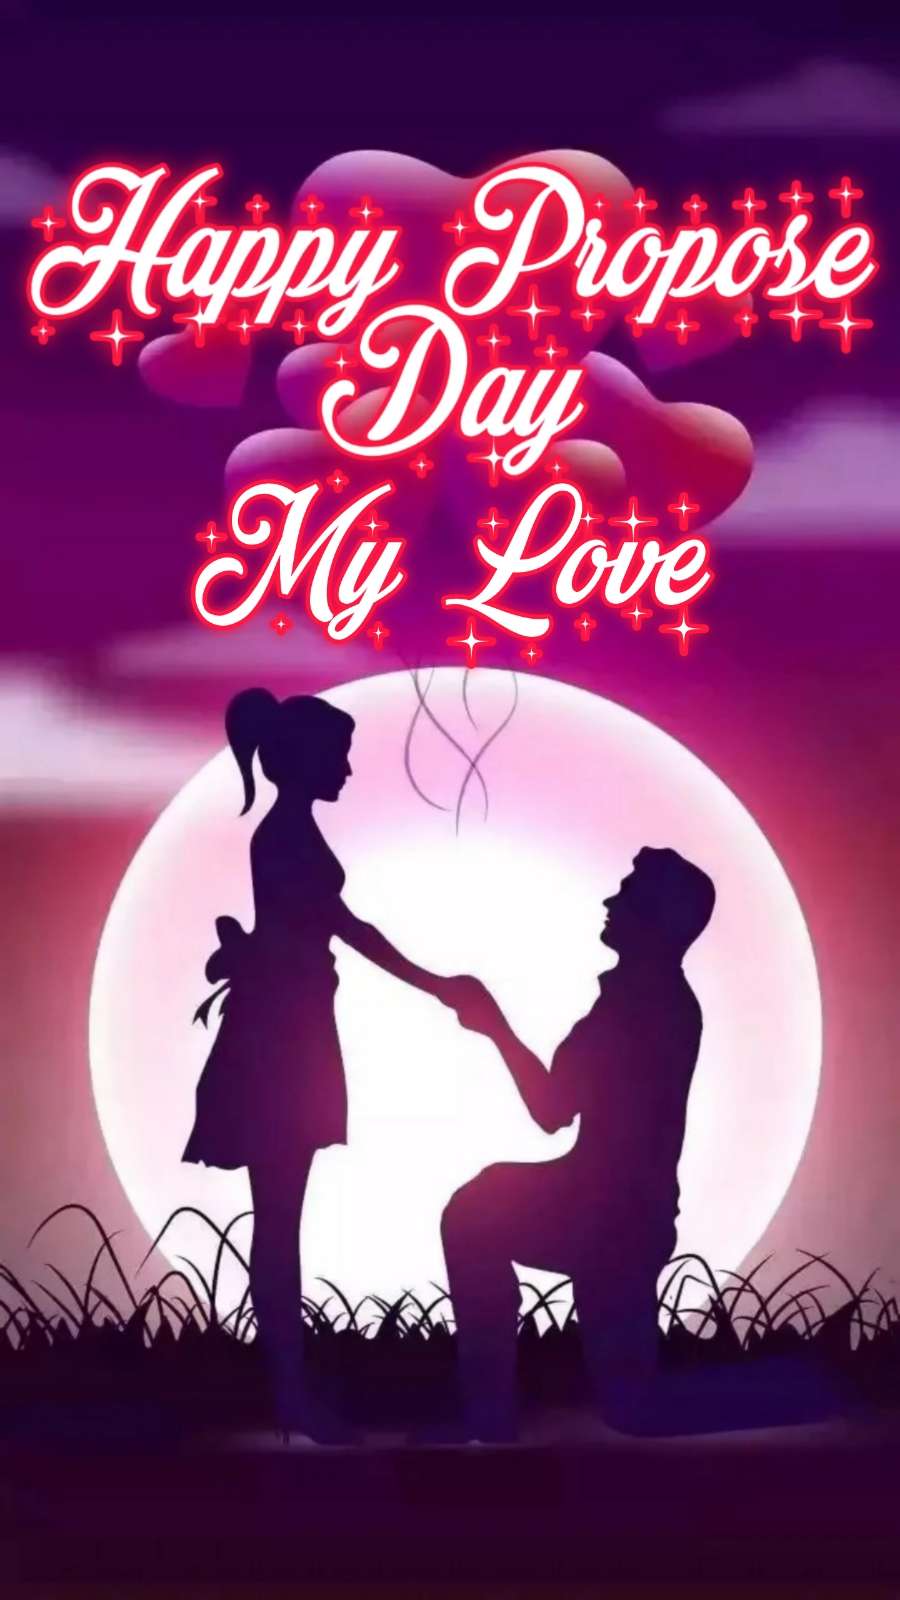 Propose Day Wallpaper 2023 HD Images Free Download